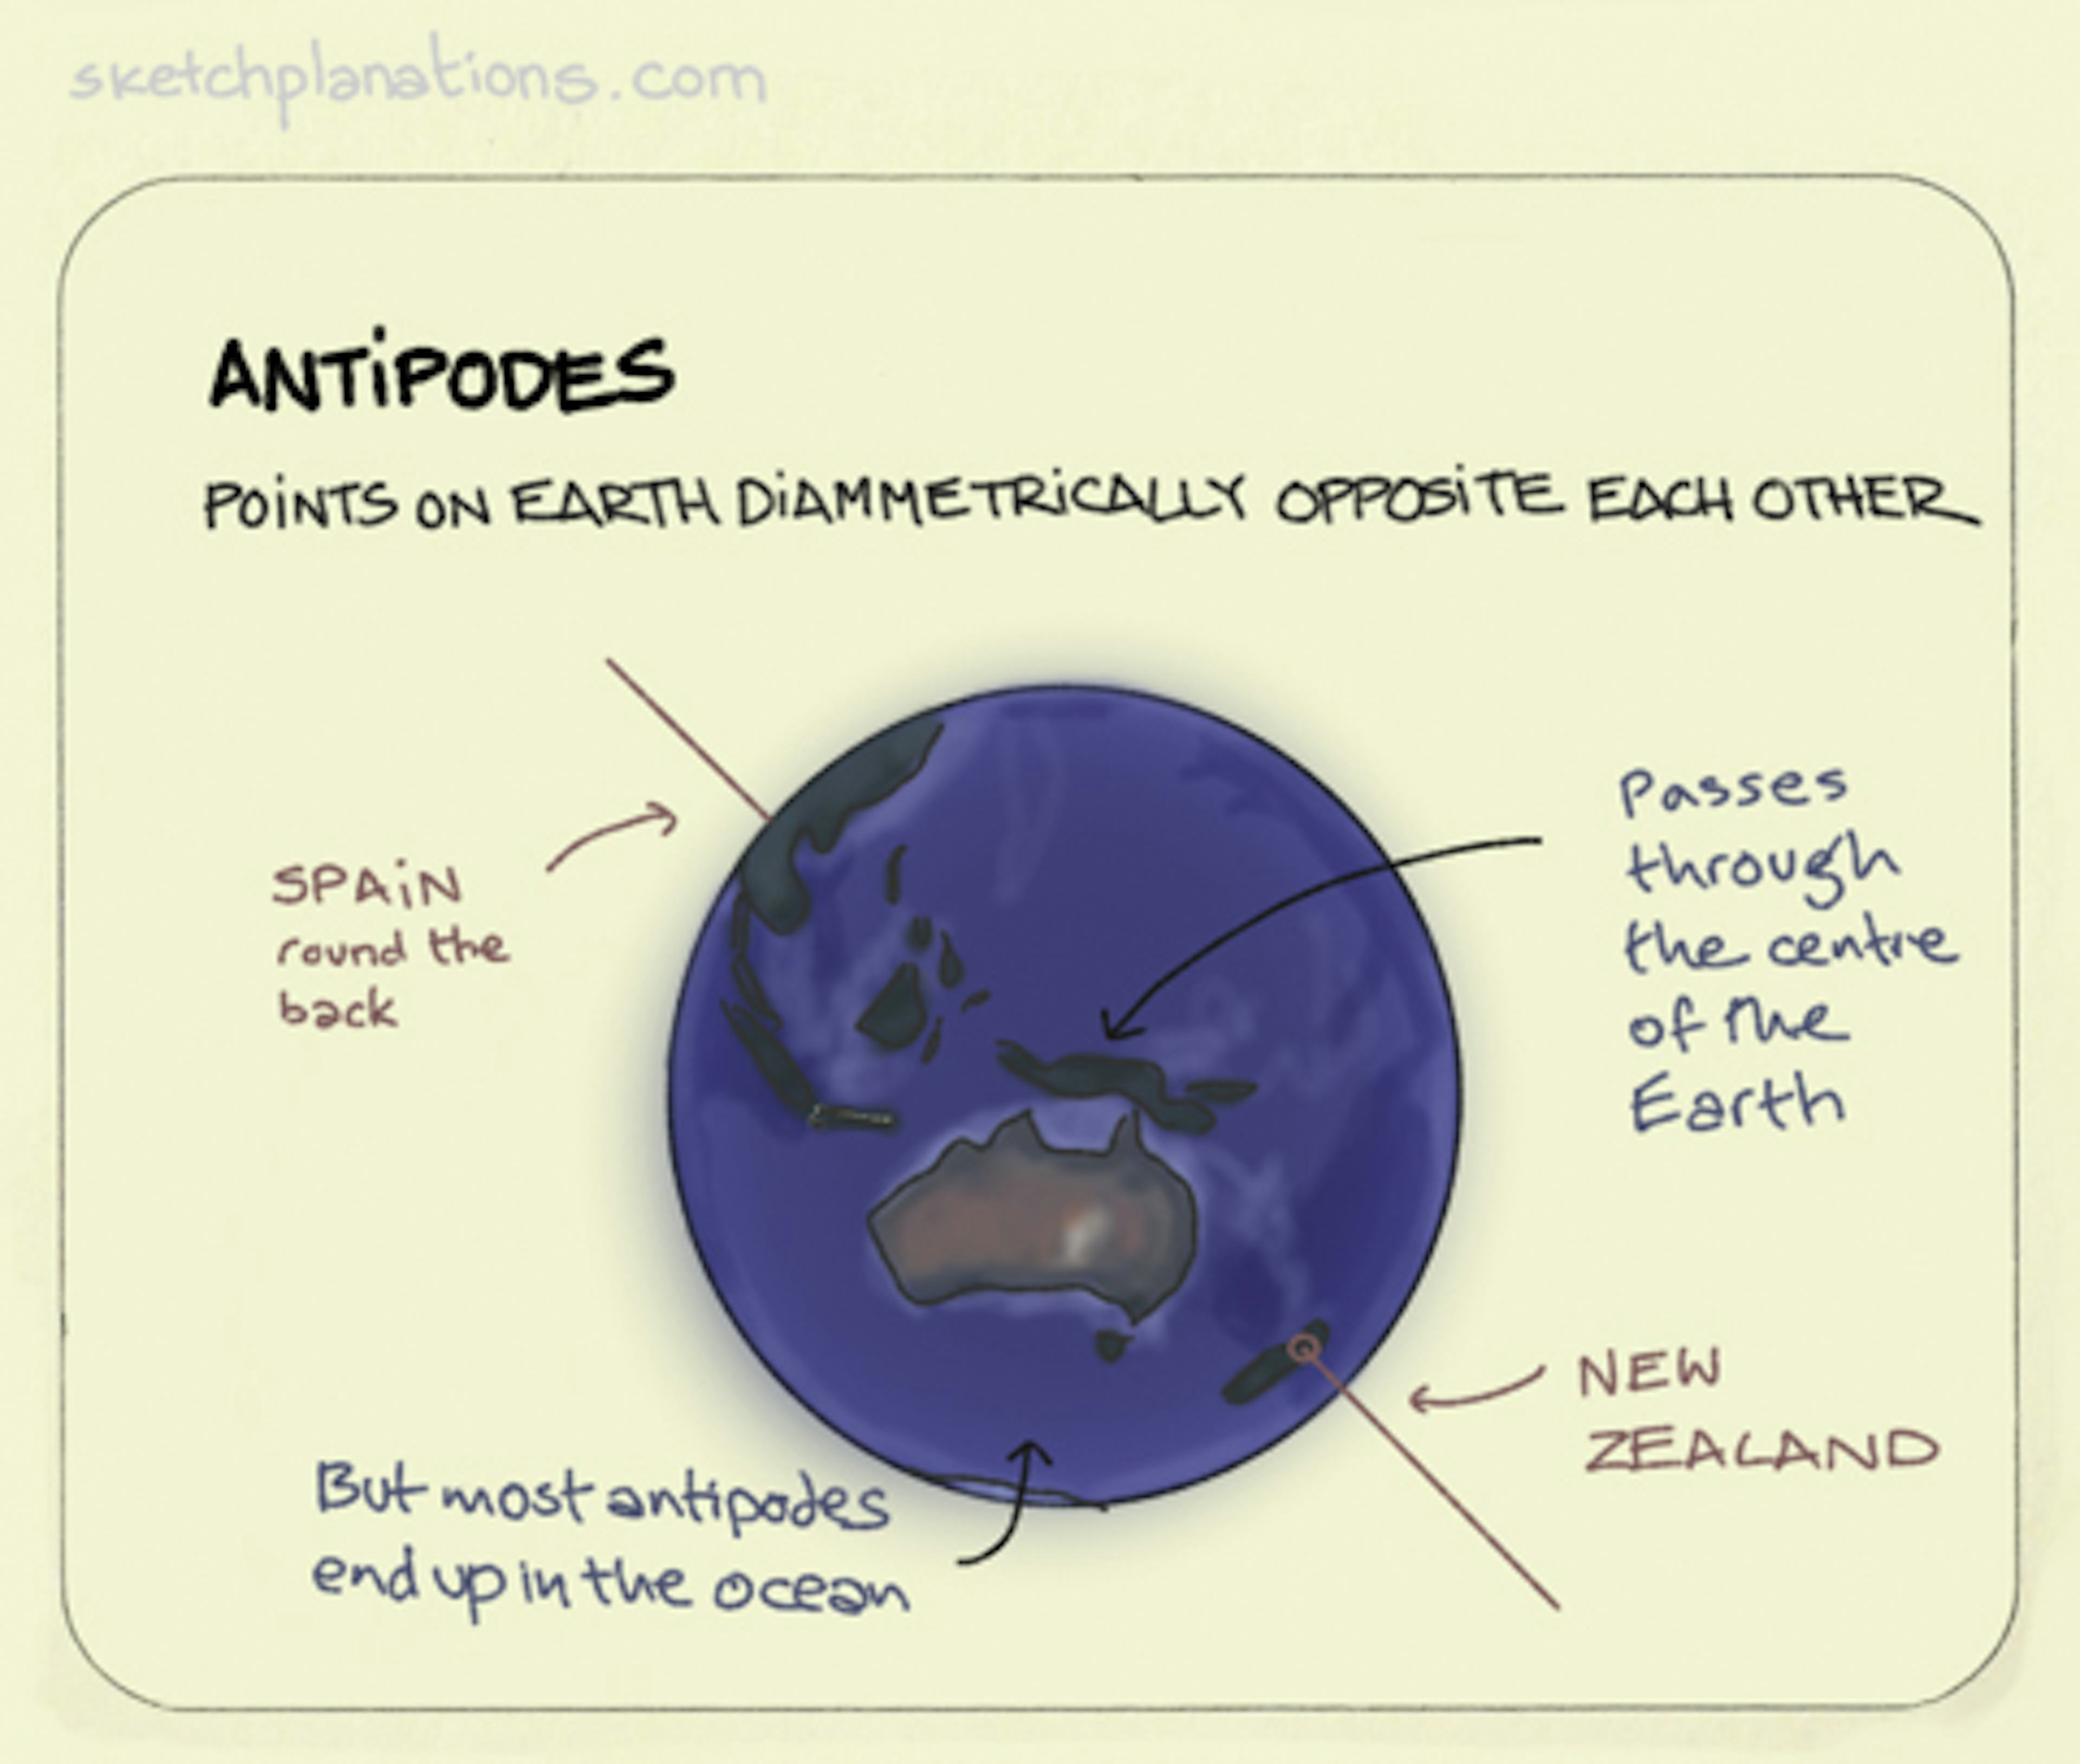 Antipodes illustration: the earth is shown as a sphere with an axis drawn straight through the centre. The example of an antipode shown is where the axis passes through Spain in the northern hemisphere and through New Zealand in the southern hemisphere. 